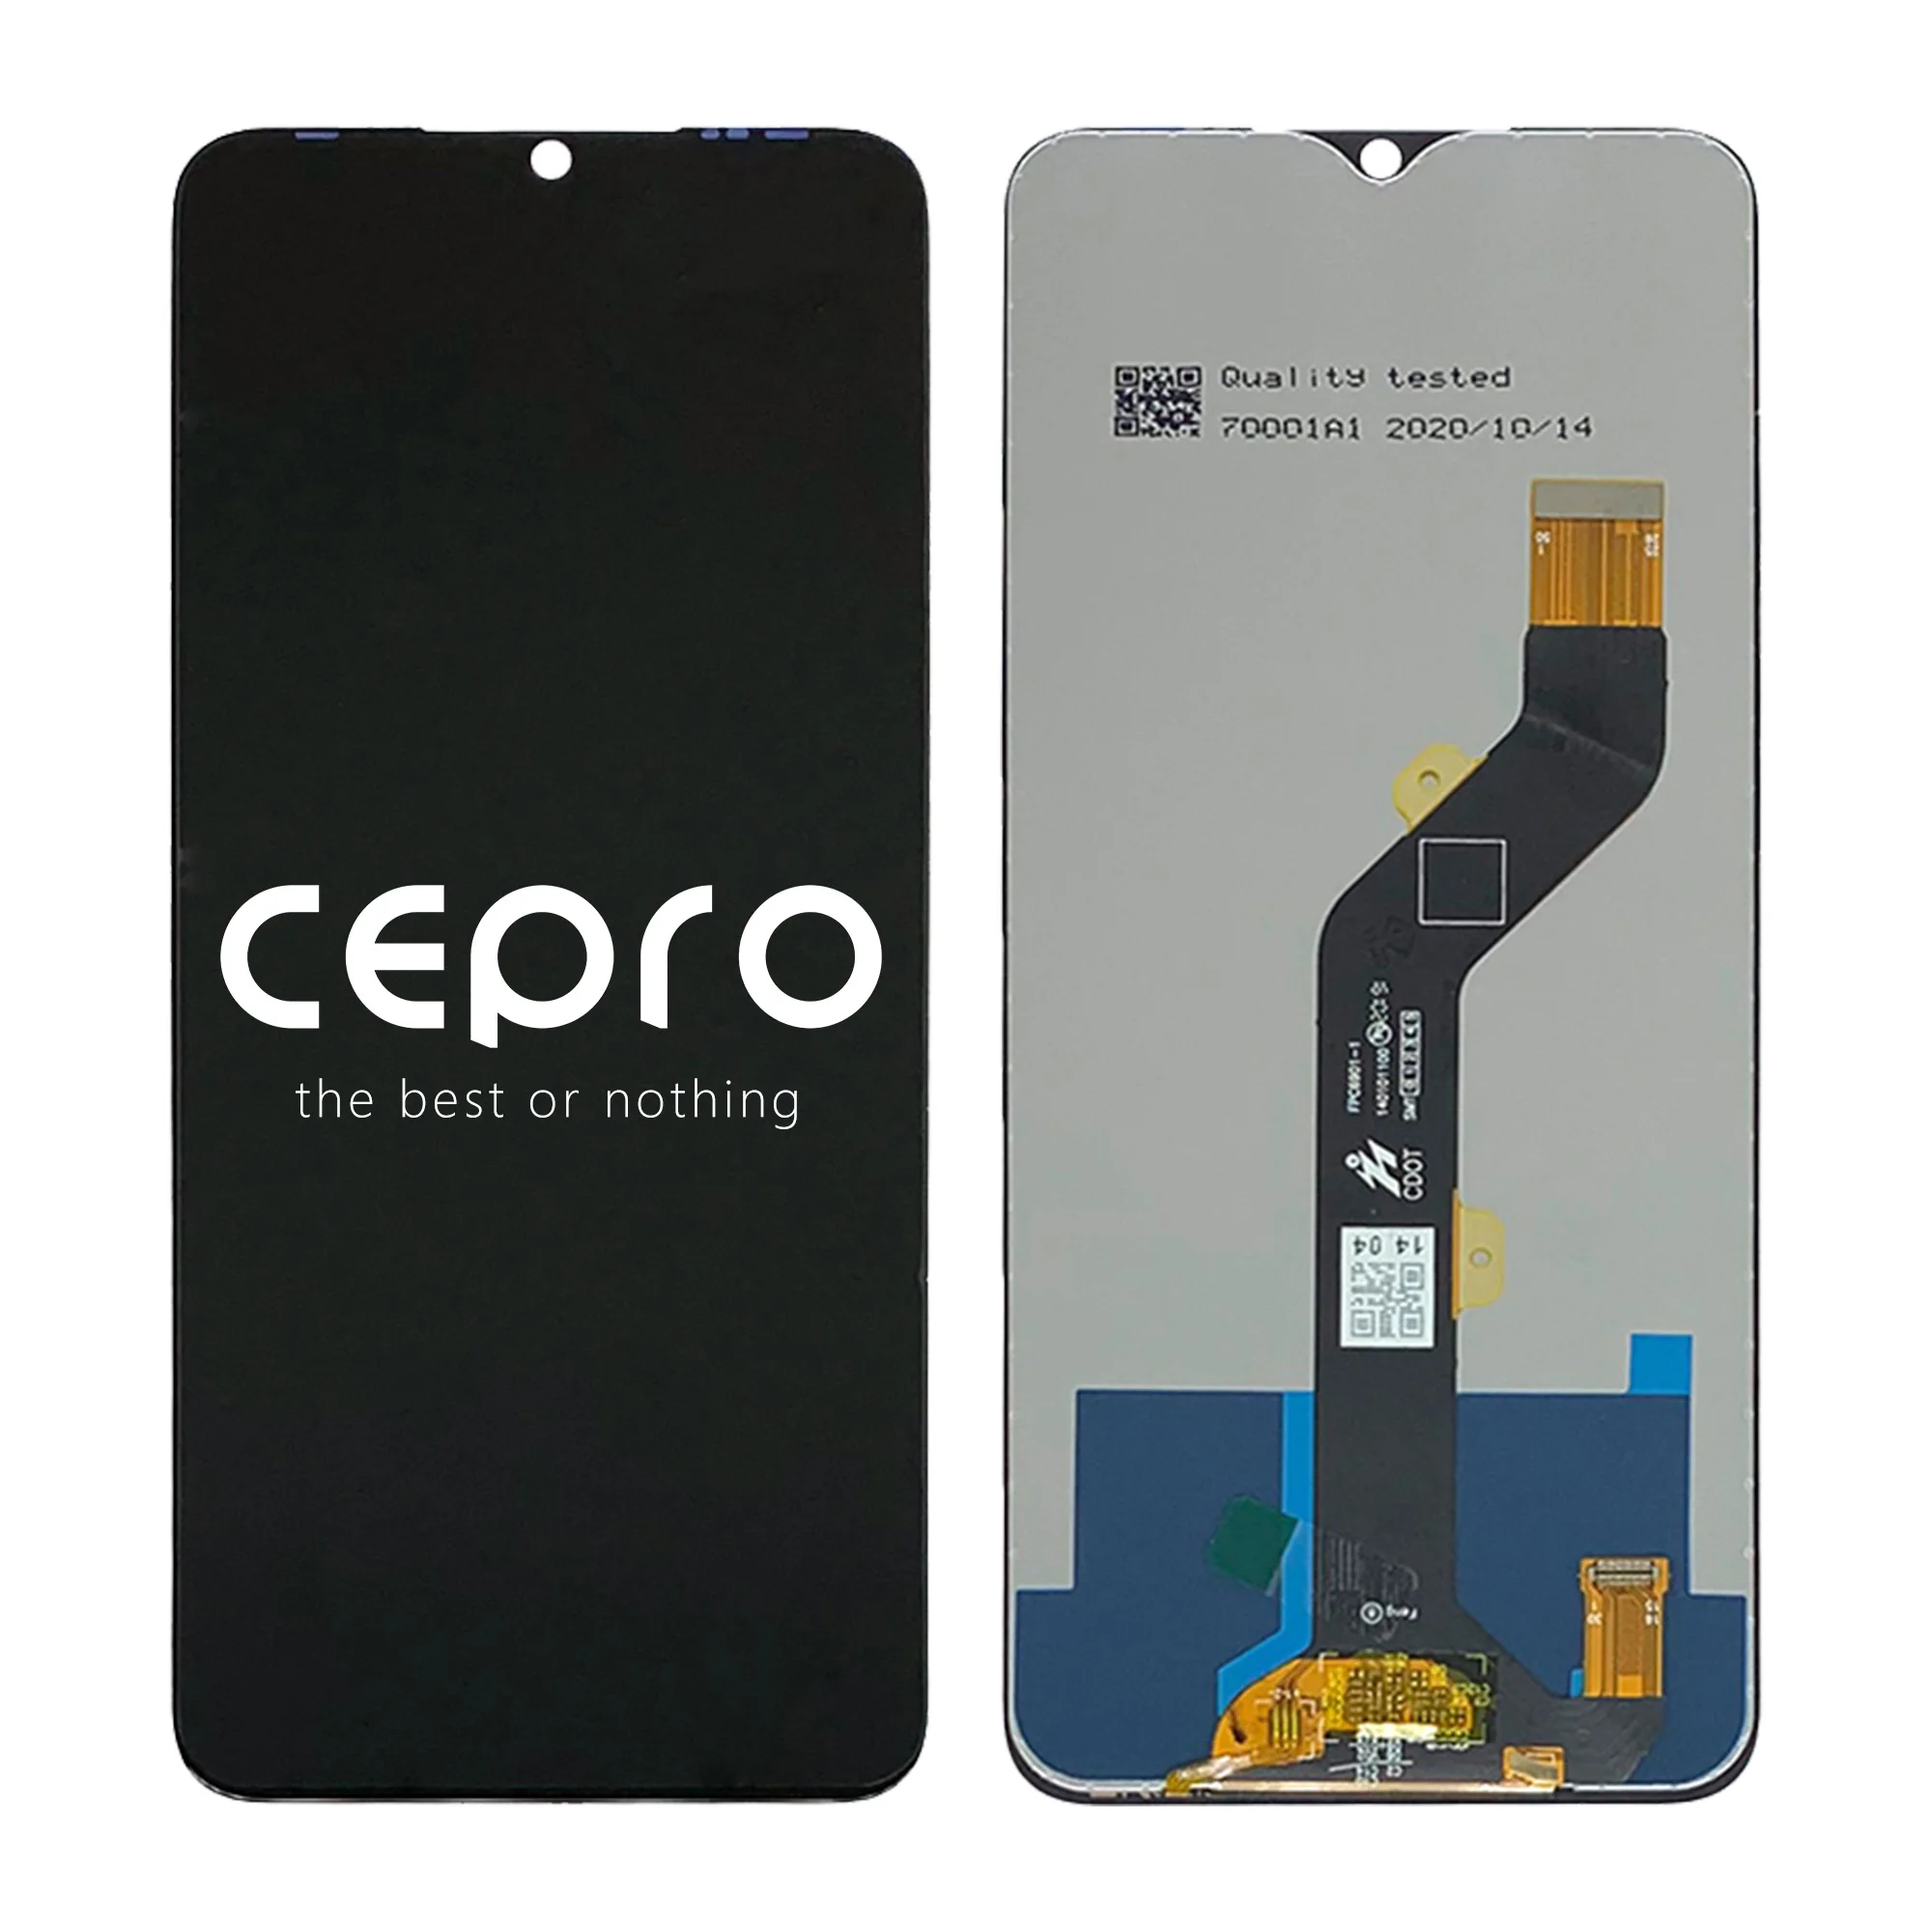 

for Tecno KD6 Spark 5 Air LCD Display Screen Combo, Mobile Phone Replacement Parts, Cell Phone Digitizer Touch Assembly